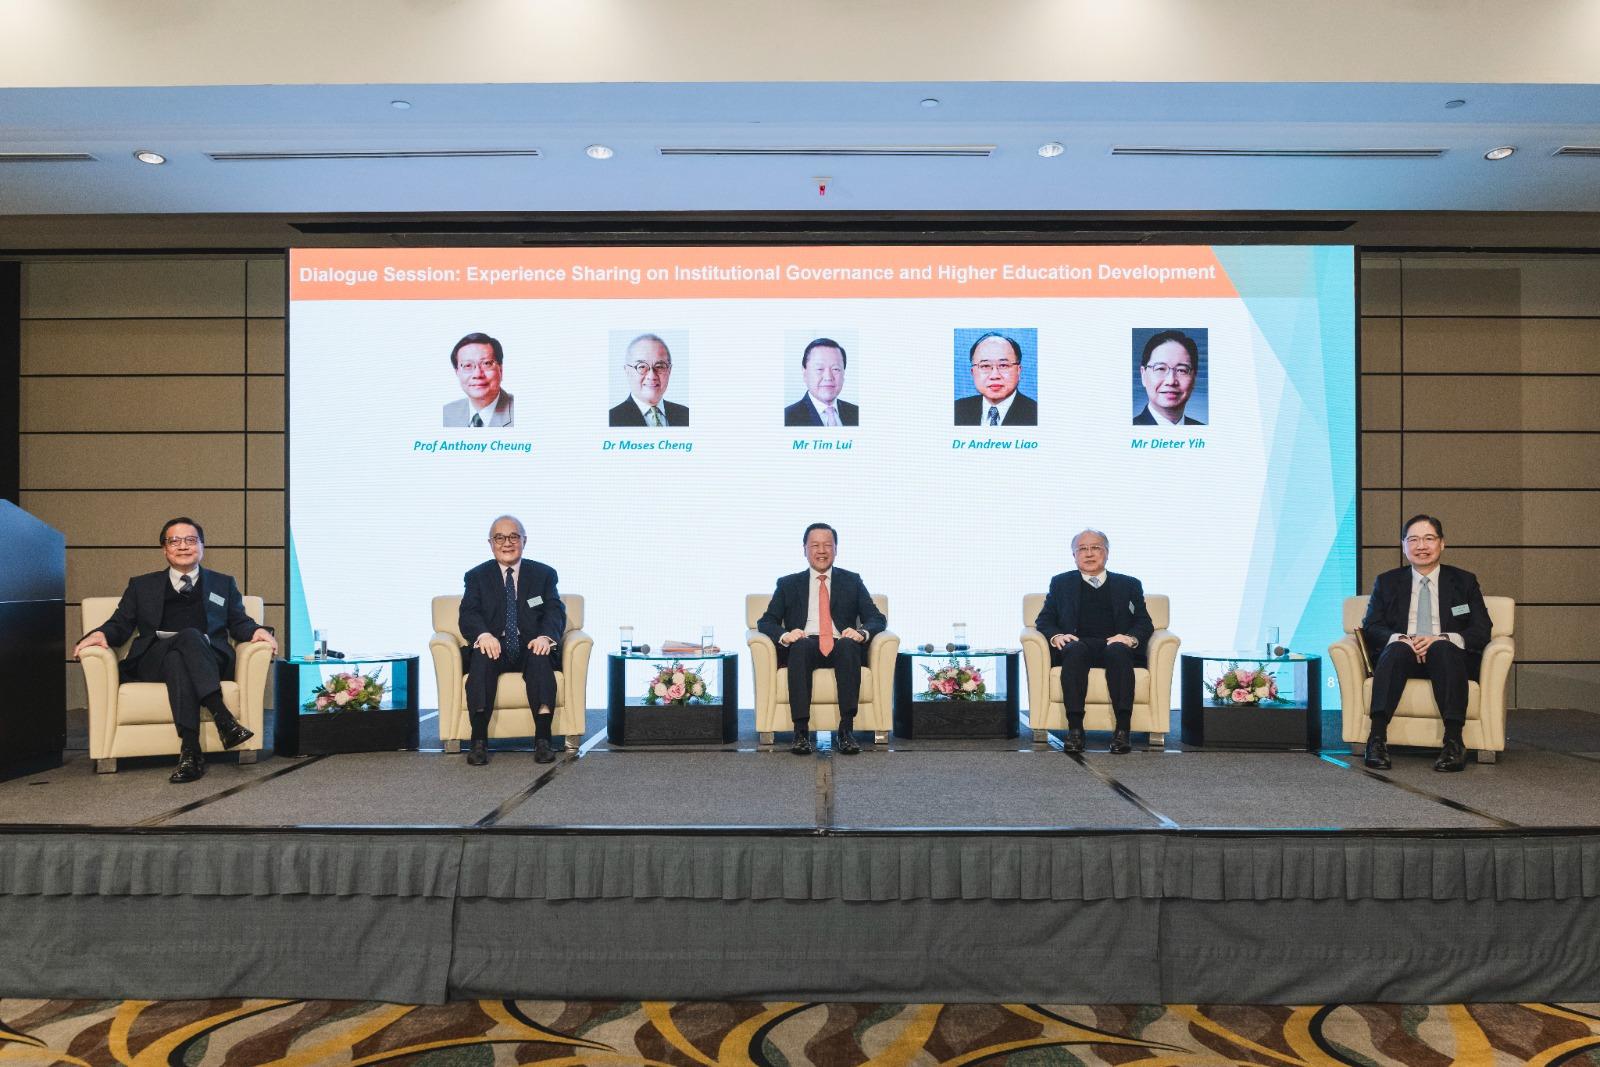 The Chairman of the University Grants Committee (UGC), Mr Tim Lui (centre); Executive Council member Dr Moses Cheng (second left); the Chairman of the Court of the Hong Kong University of Science and Technology, Dr Andrew Liao (second right); former President of the Hong Kong Institute of Education Professor Anthony Cheung (first left); and UGC member and former Deputy Chairman of the Council of the Education University of Hong Kong, Mr Dieter Yih (first right), exchanged views on the development of higher education in Hong Kong at the University Leadership Forum today (January 30).